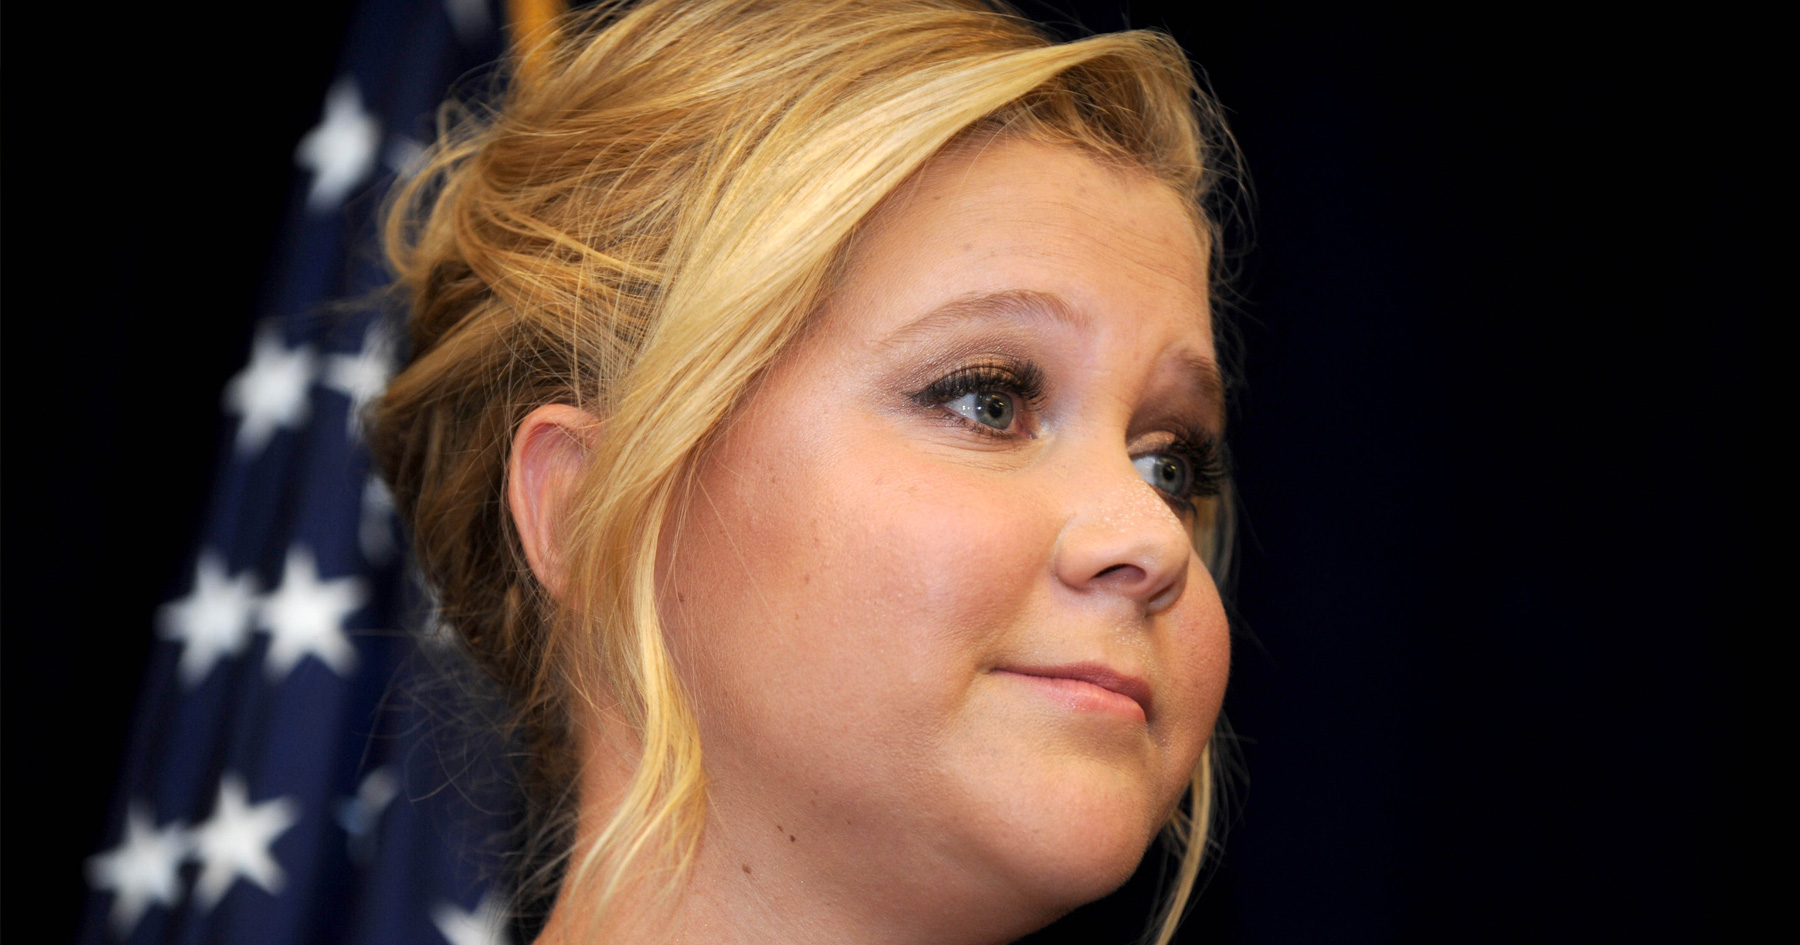 Amy Schumer at a press conference about gun violence